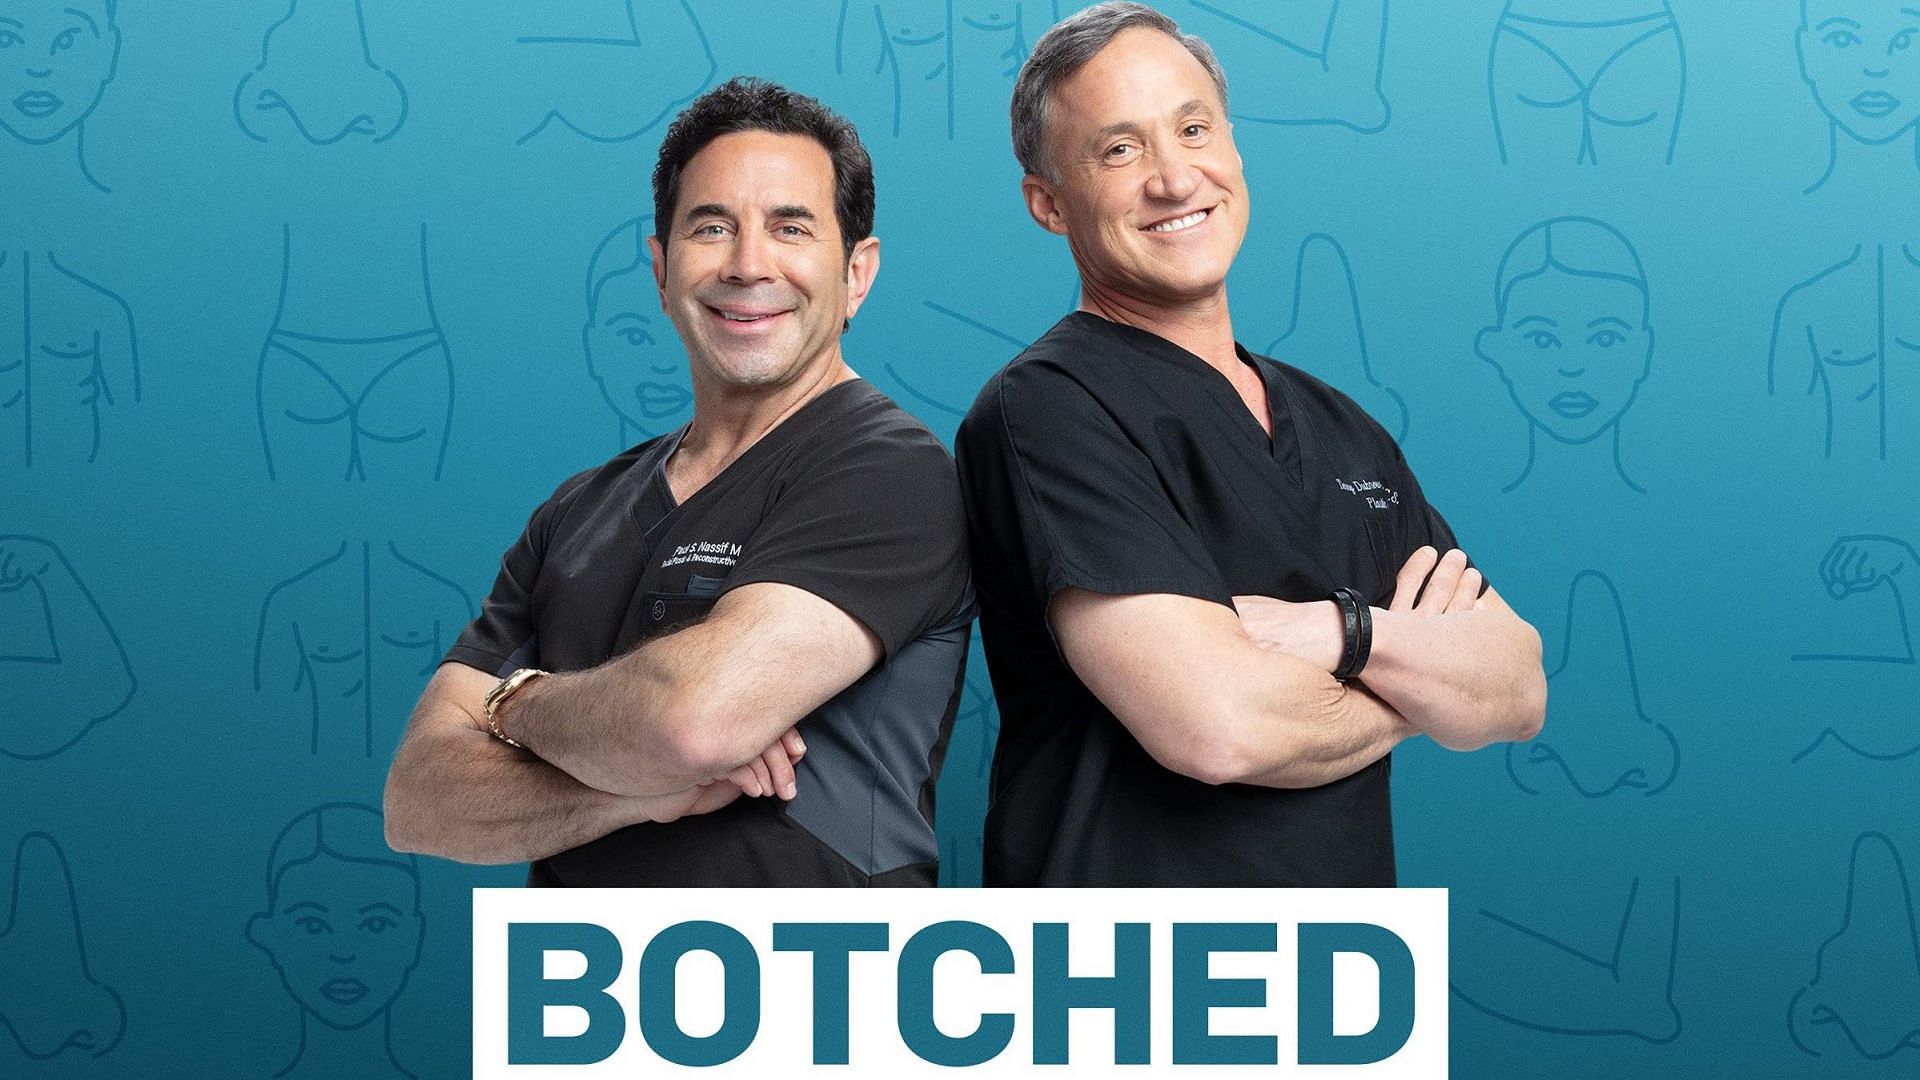 Does Botched! pay for surgeries? Costs explored ahead of Season 7B premiere